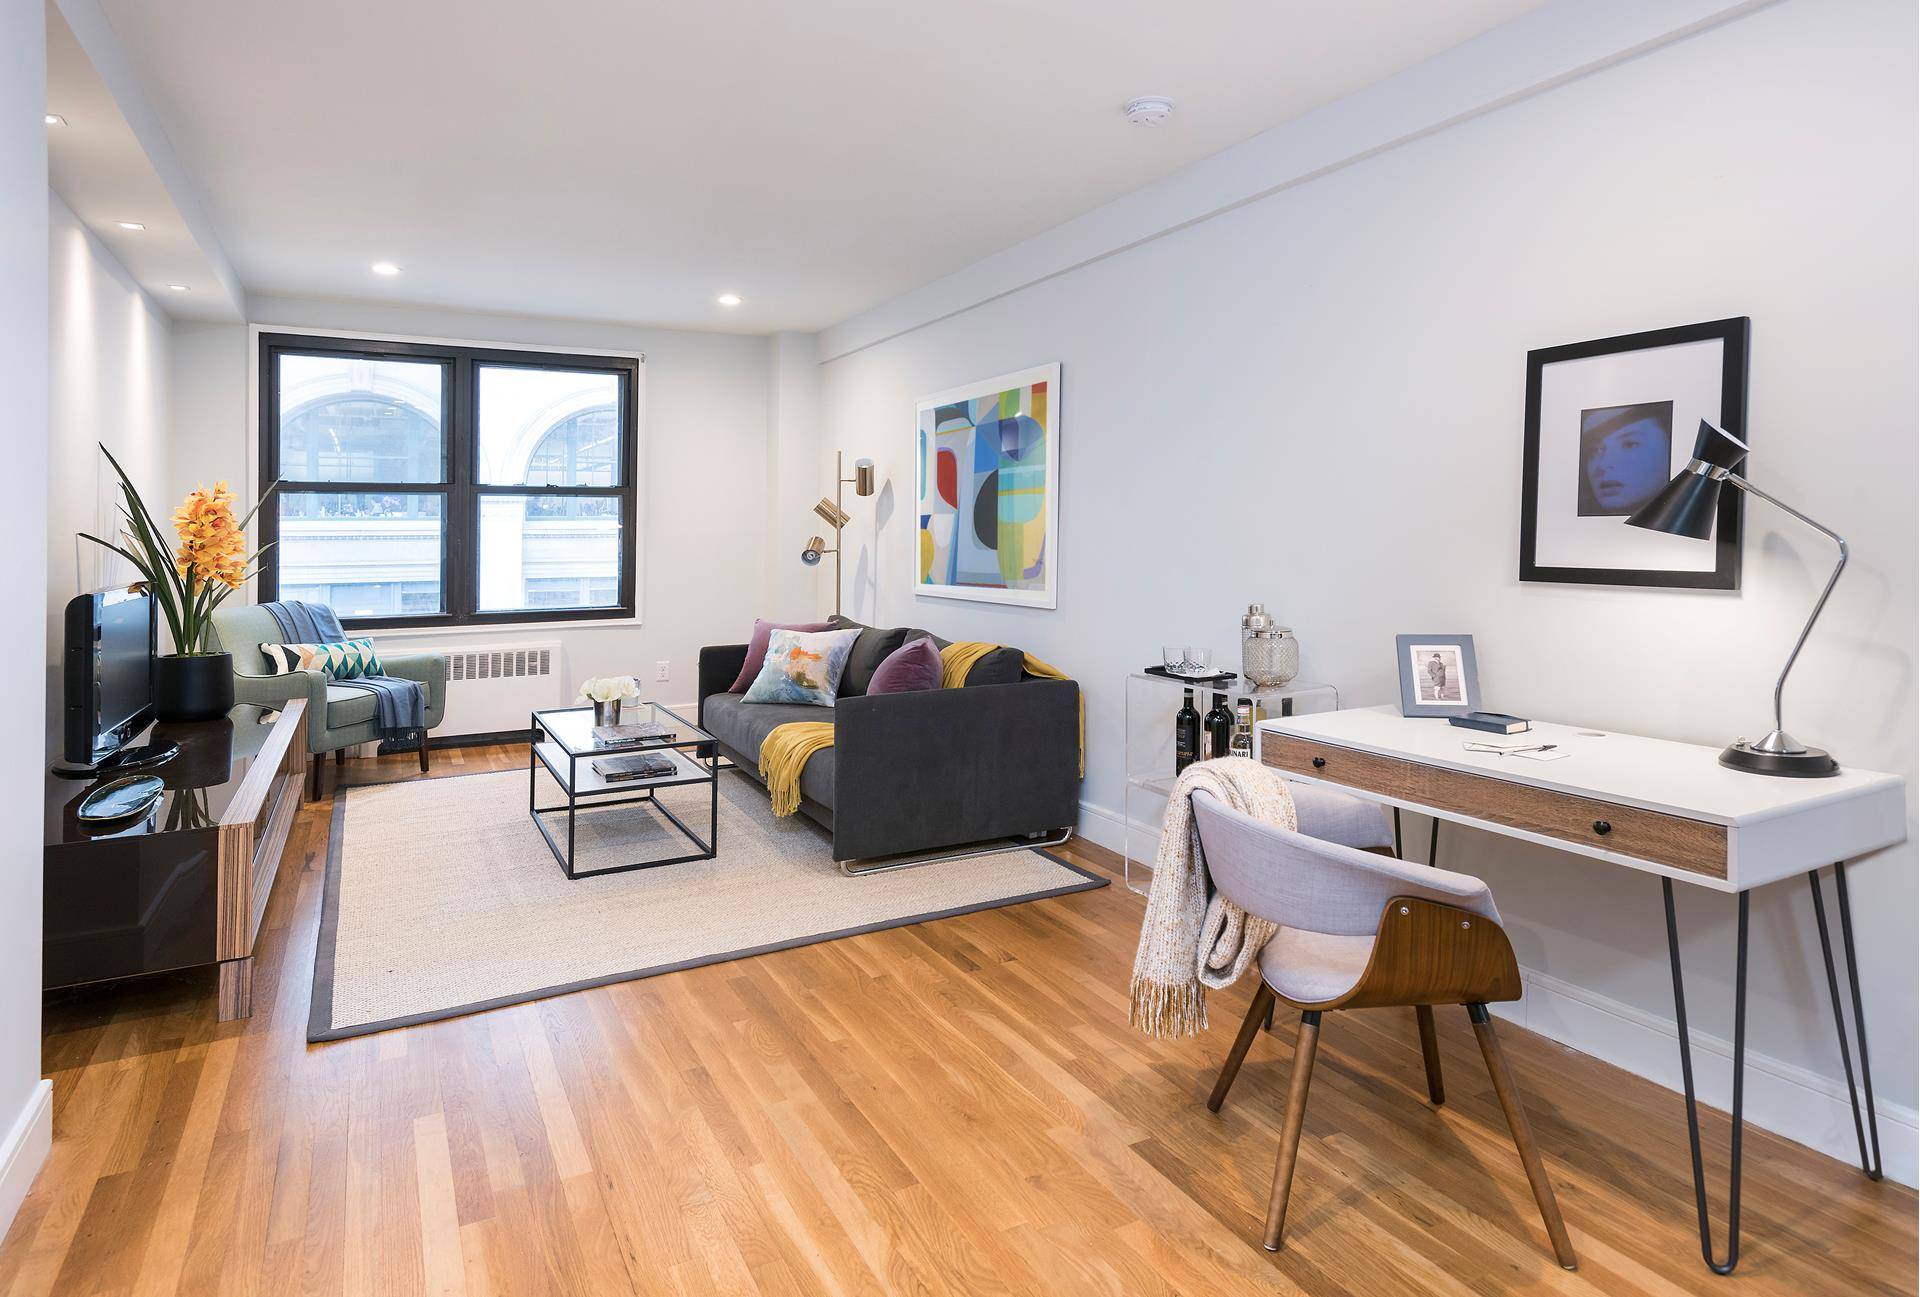 A stunning 2 bedroom 1 bathroom apartment at the Hamilton is now on the market, on a charming tree lined Street in the heart of Greenwich Village.